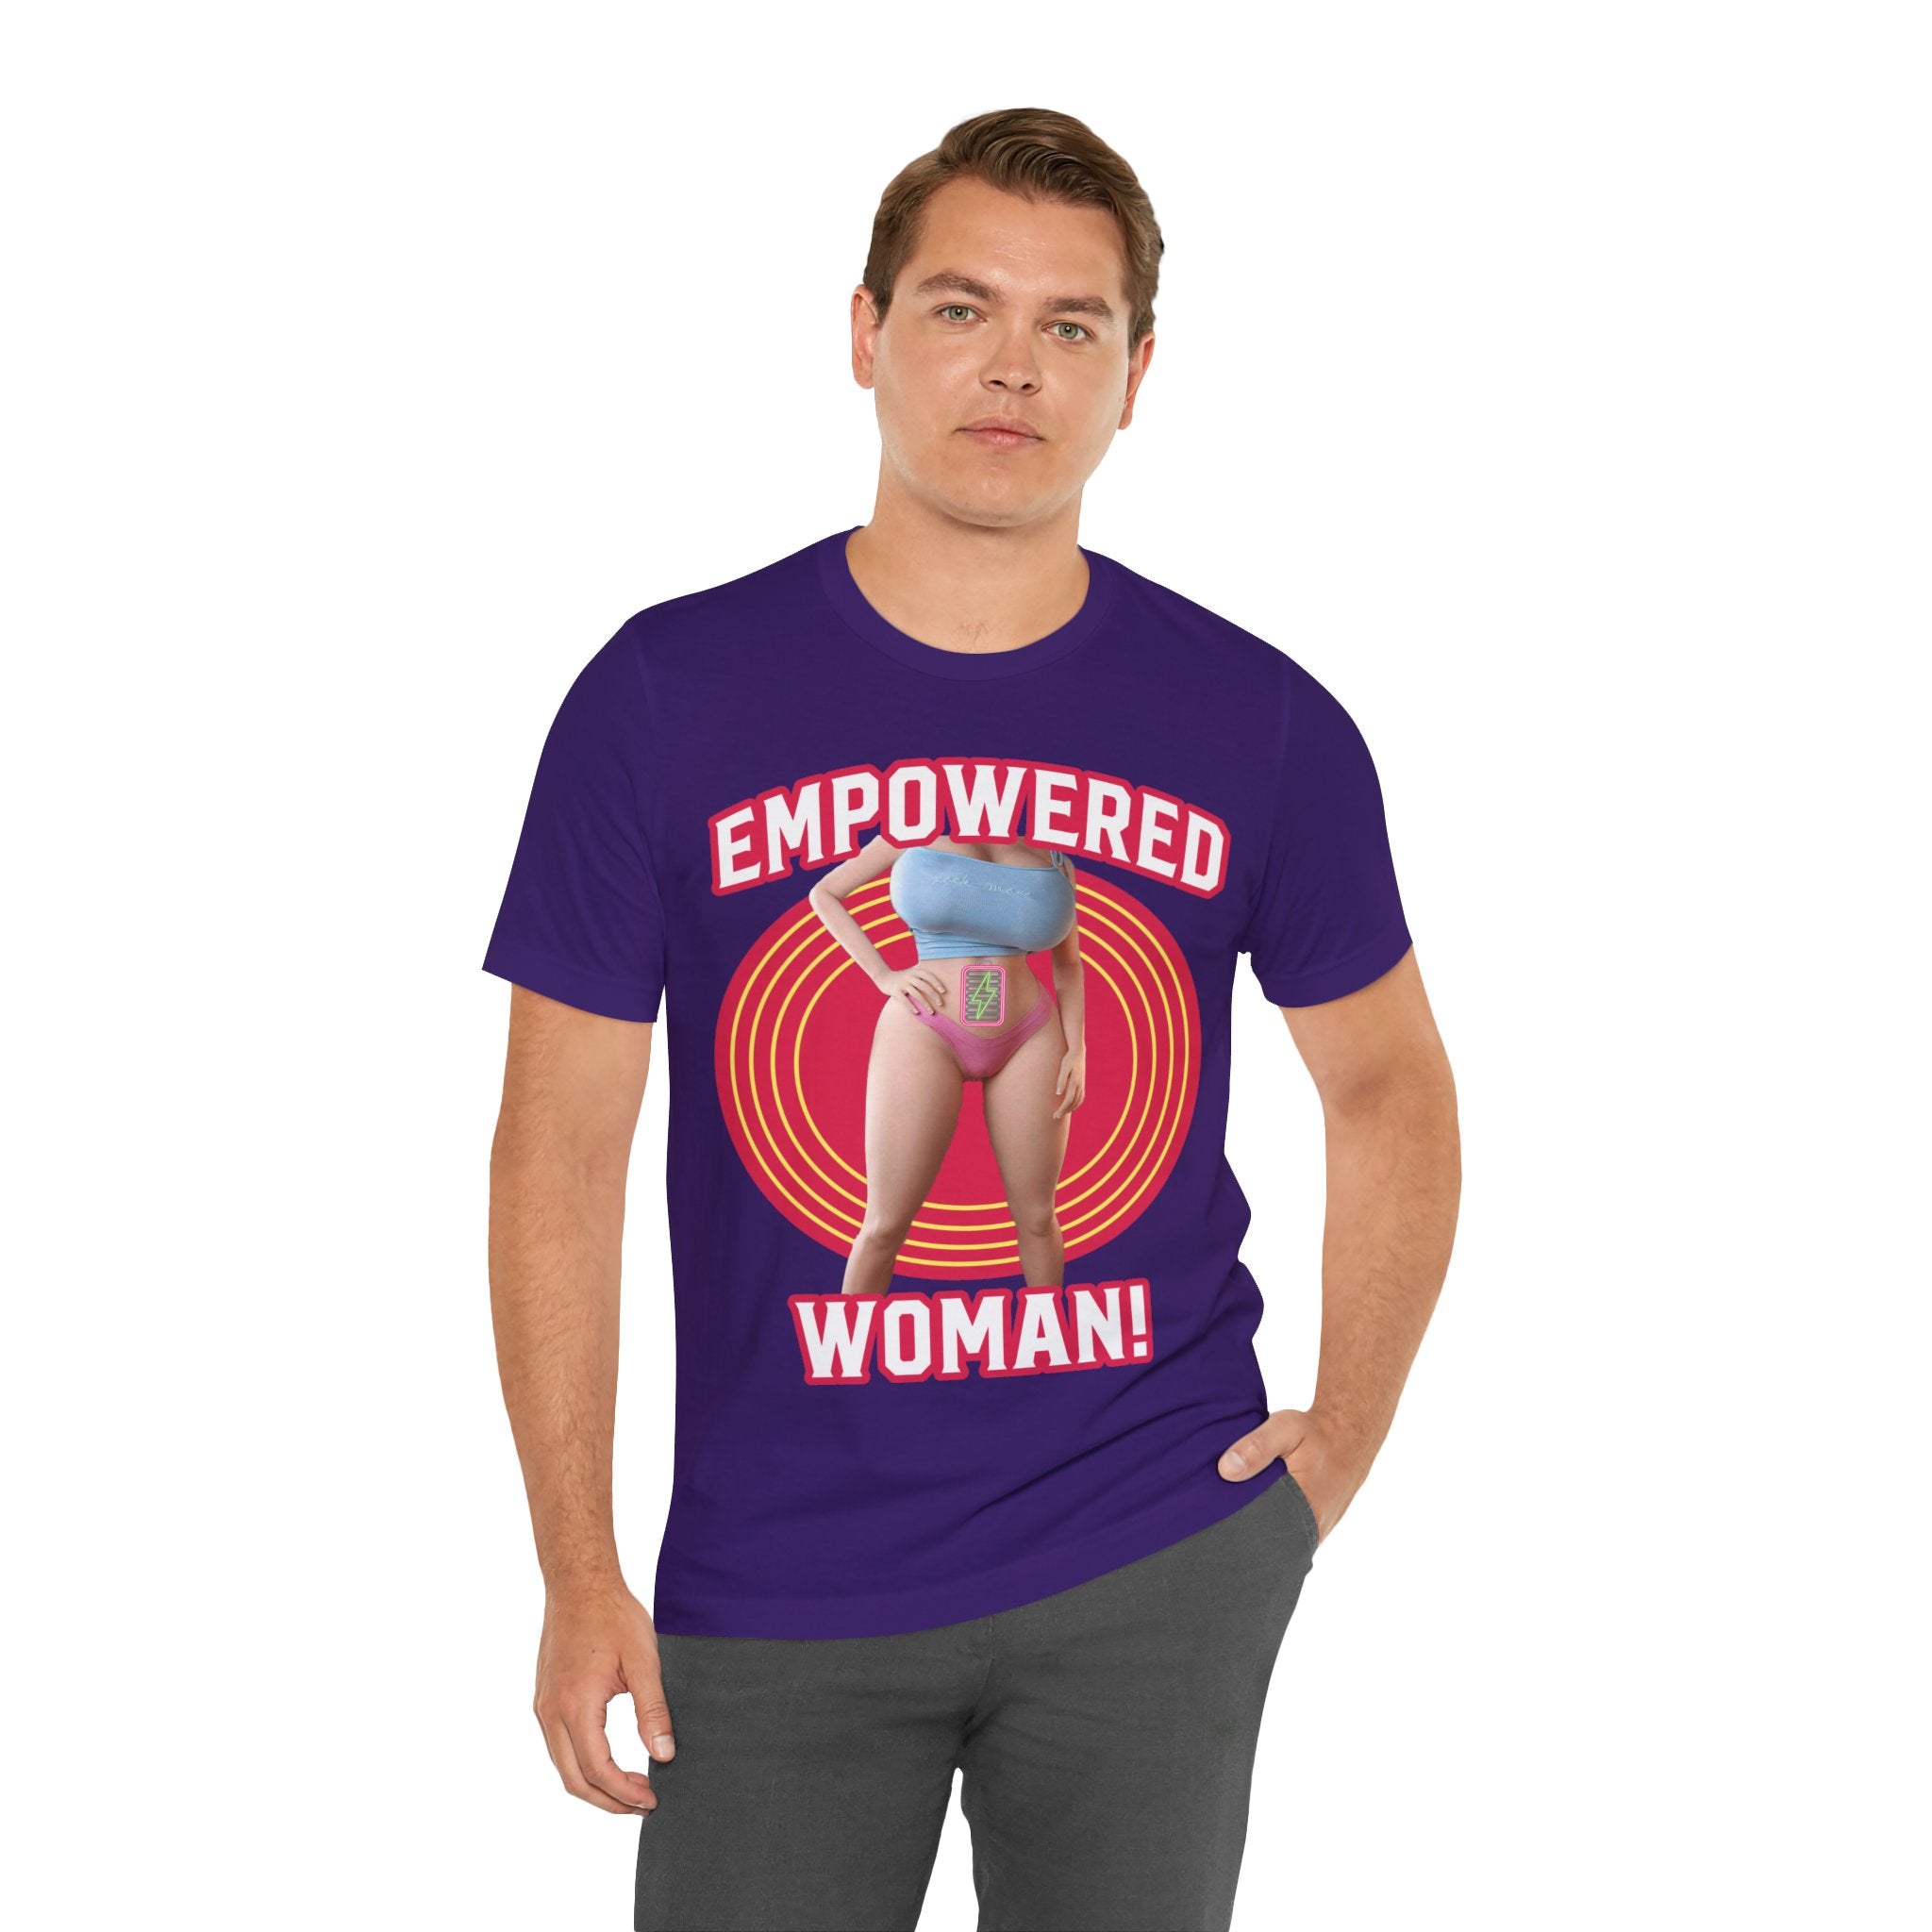 Empowered Woman